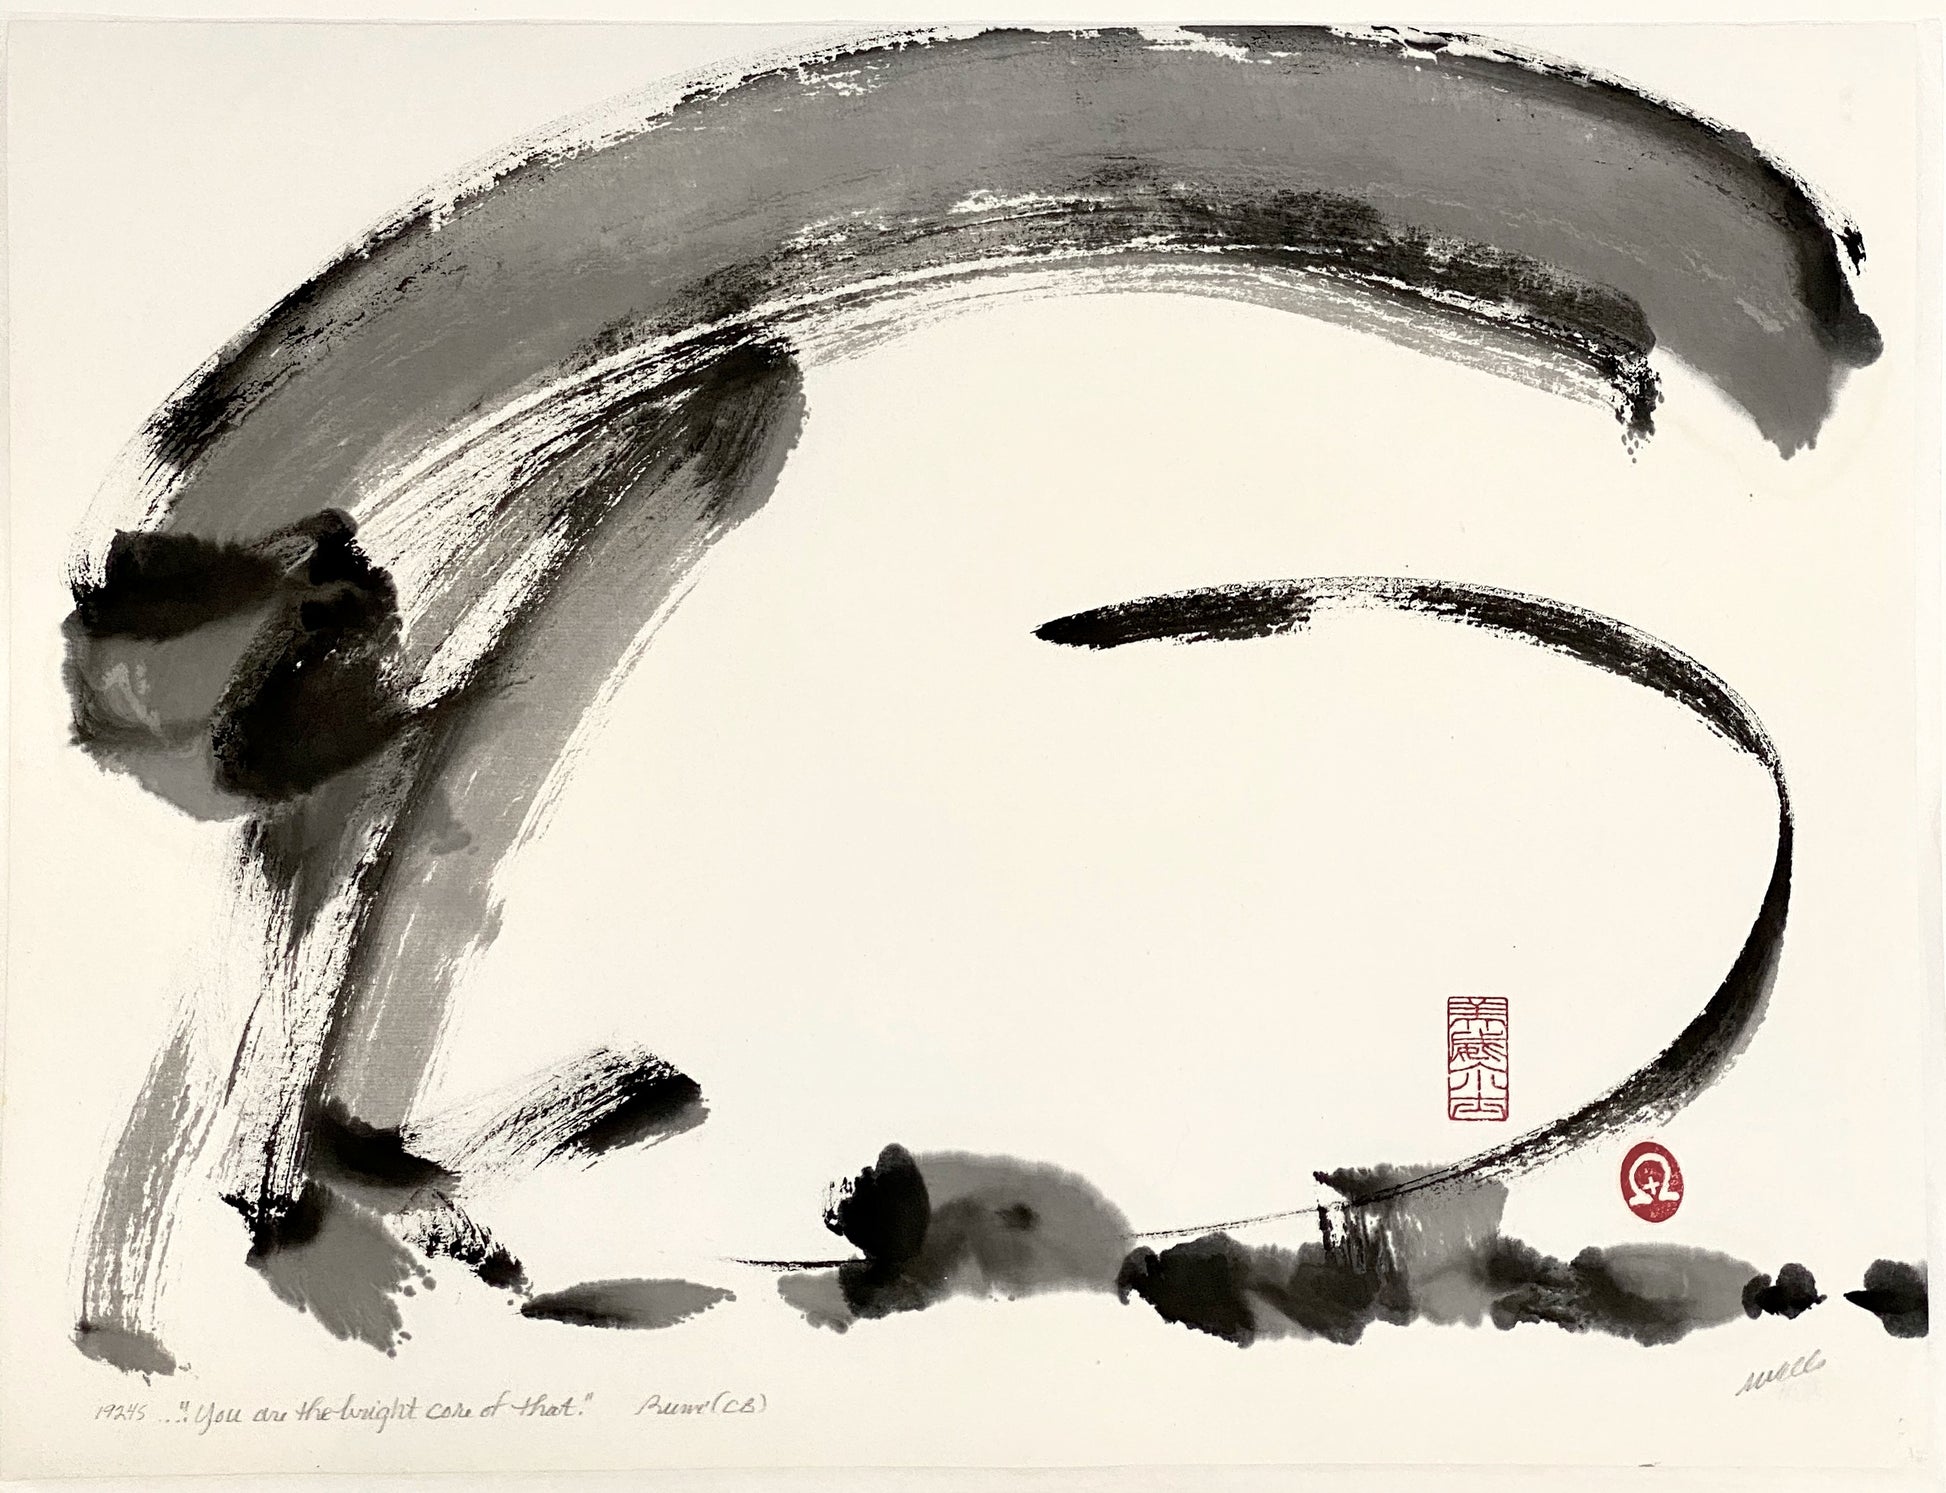 "Your Bright Core" by Marilyn Wells, Zen Abstract sumi e Print